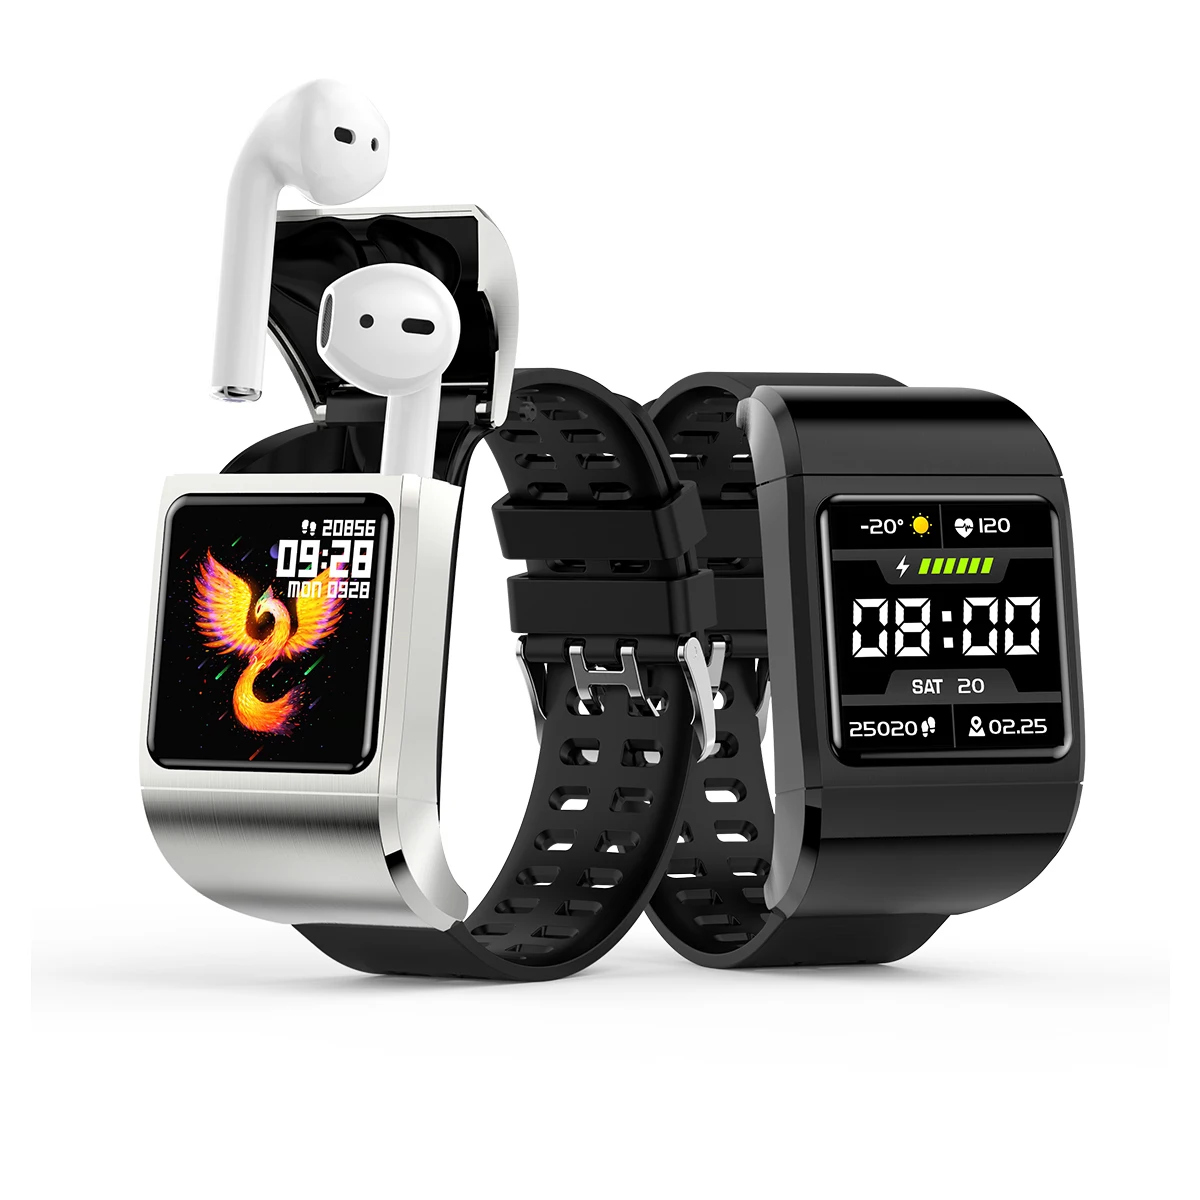 

Newest Arrival G36Pro 2 in 1 Smart Watch Wireless Earphone Heart Rate Monitor Full Touch Screen Music Fitness Watch with Headset, Black, silver,blue,pink